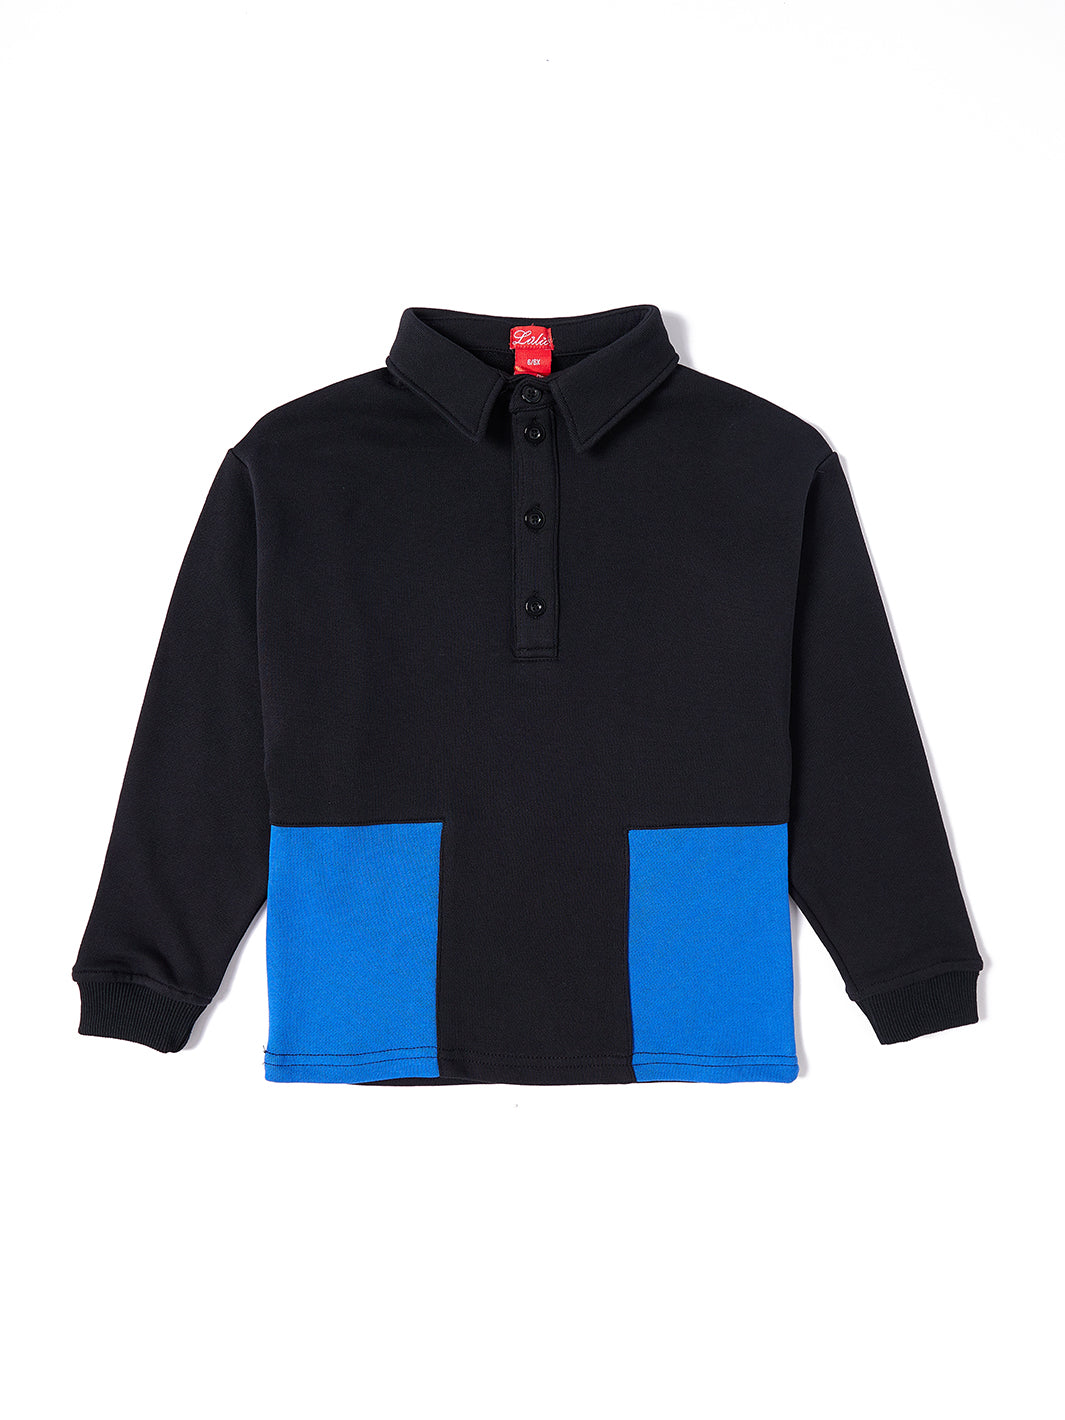 Contrast Inserts Polo - Black/Royal Blue